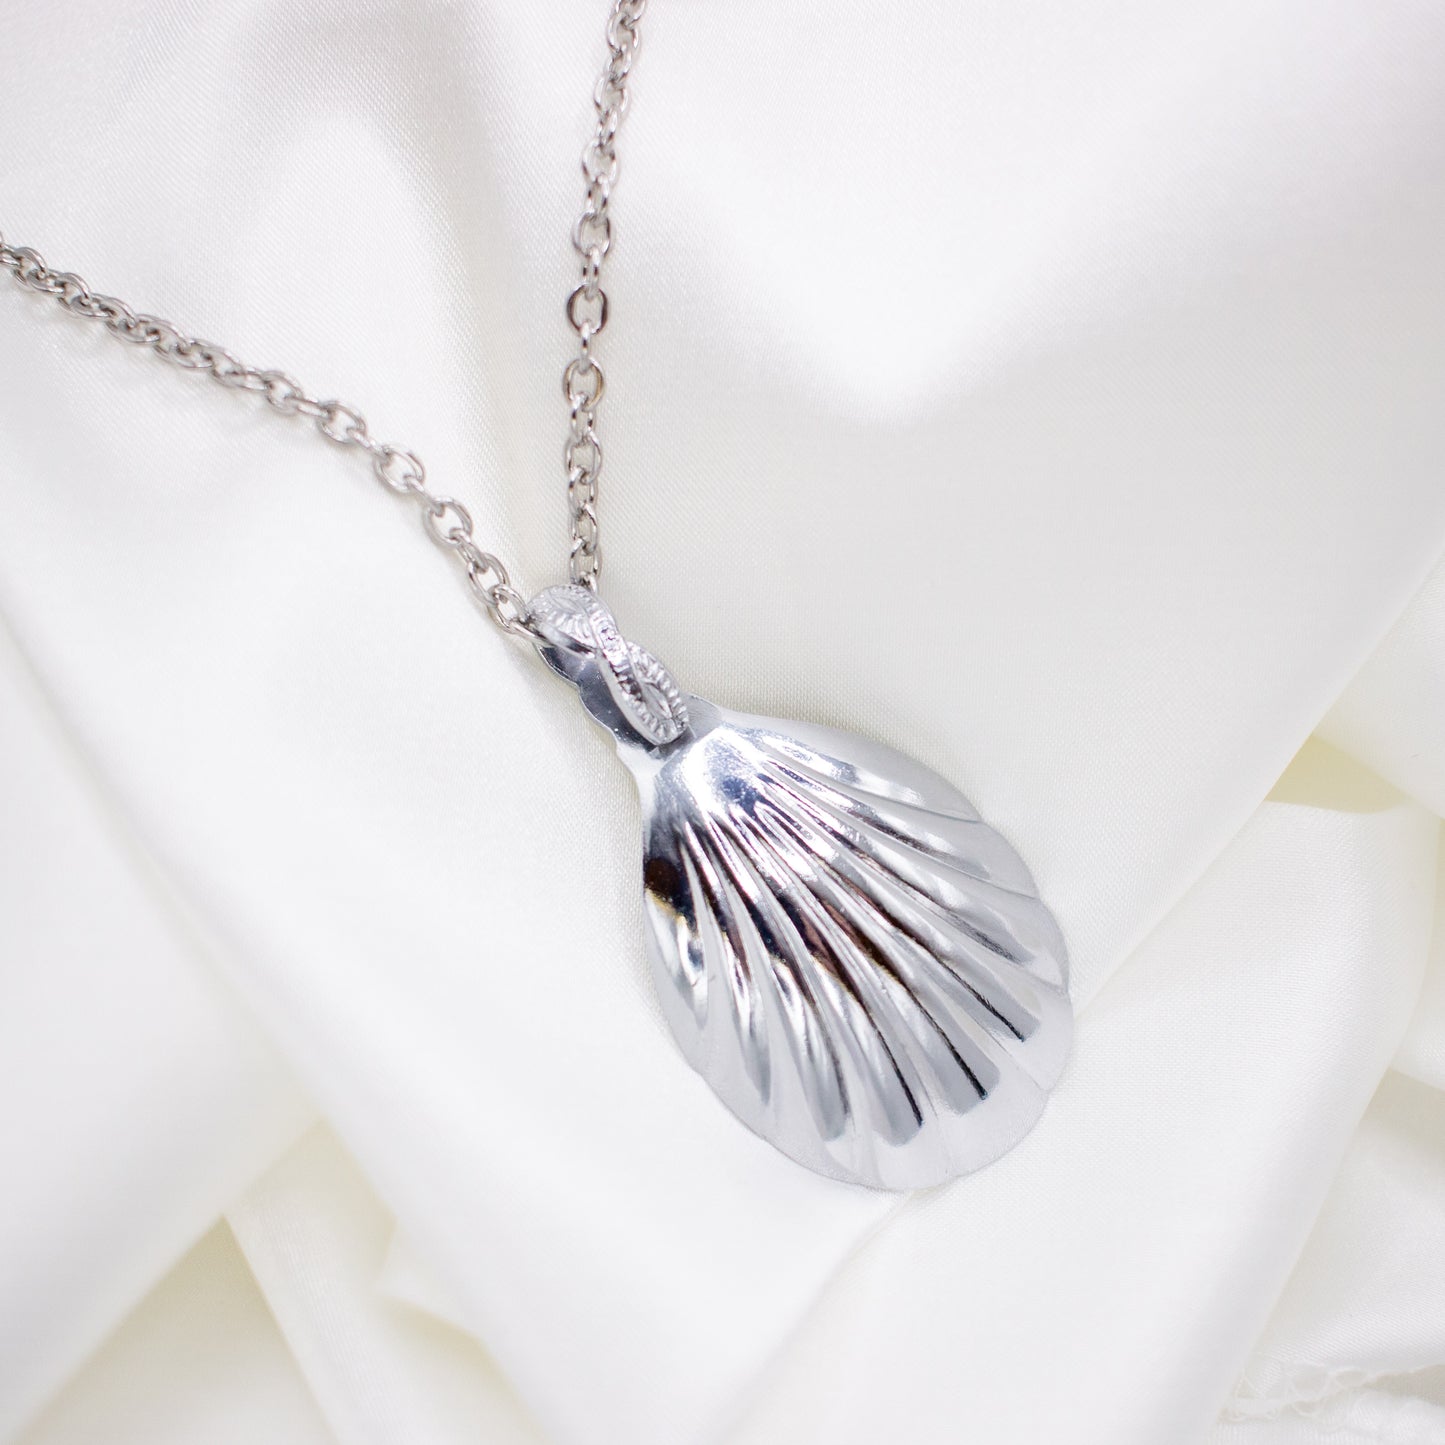 the back of a spoon necklace against a white background